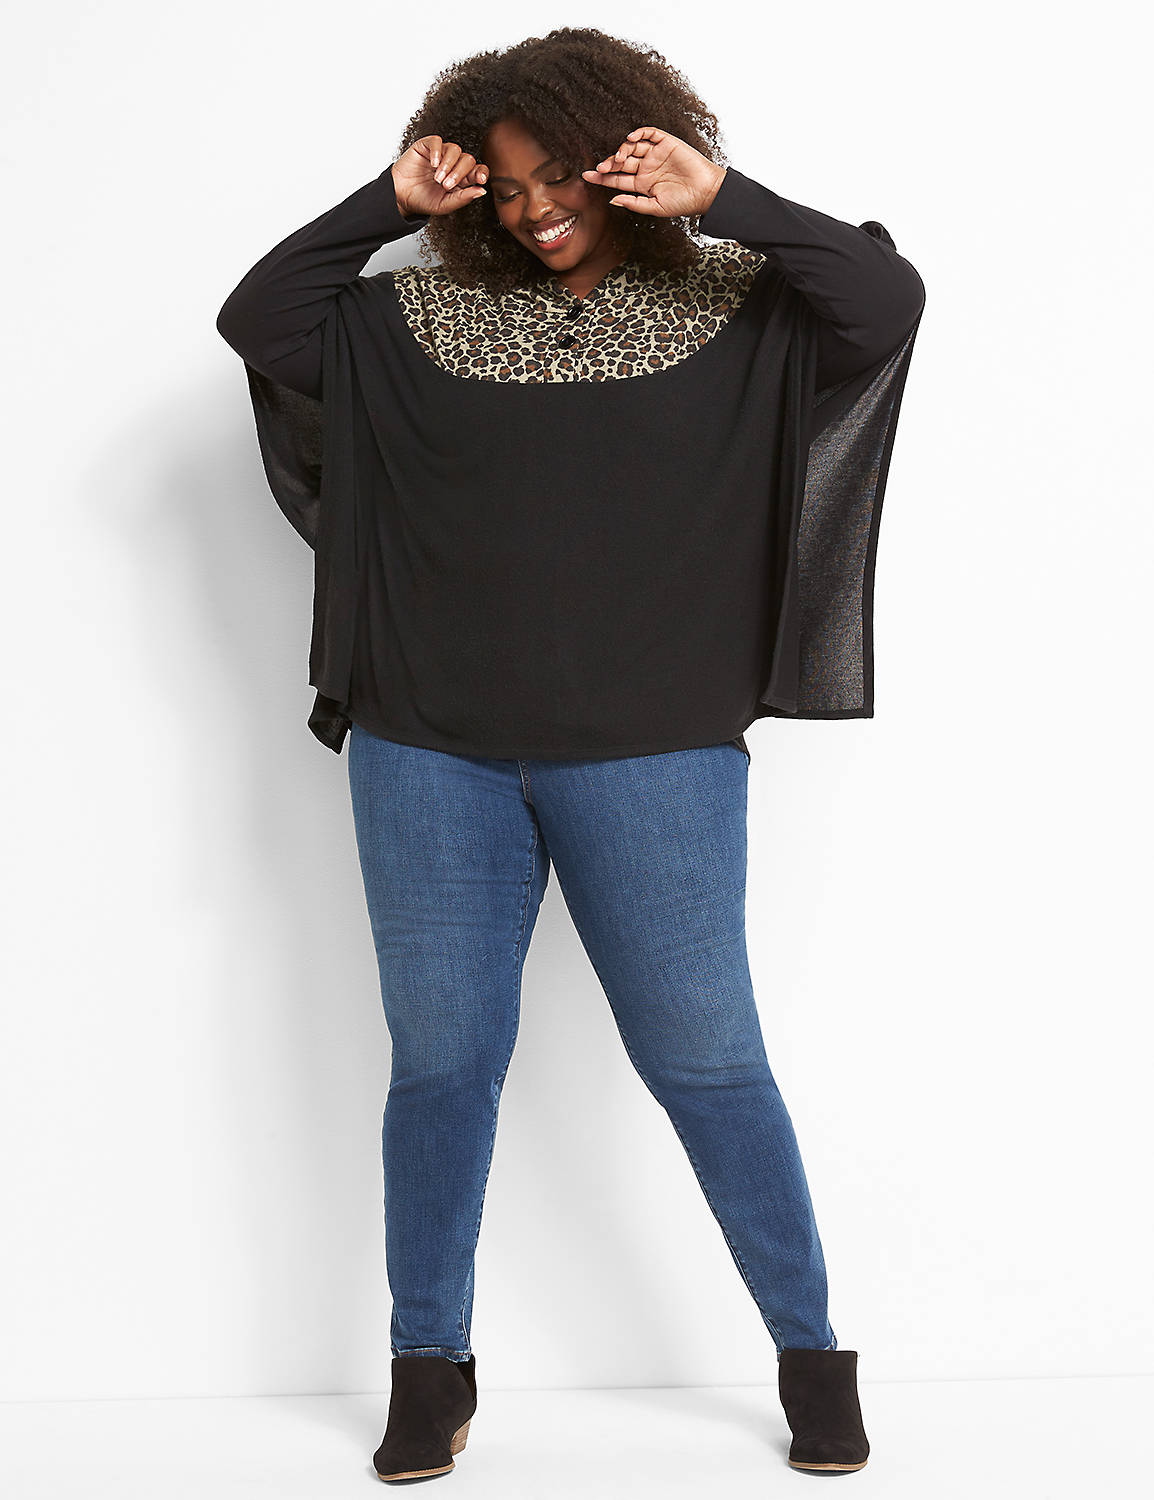 Poncho Hoodie With Leopard Mix 1124581:Ascena Black:10/12 Product Image 3